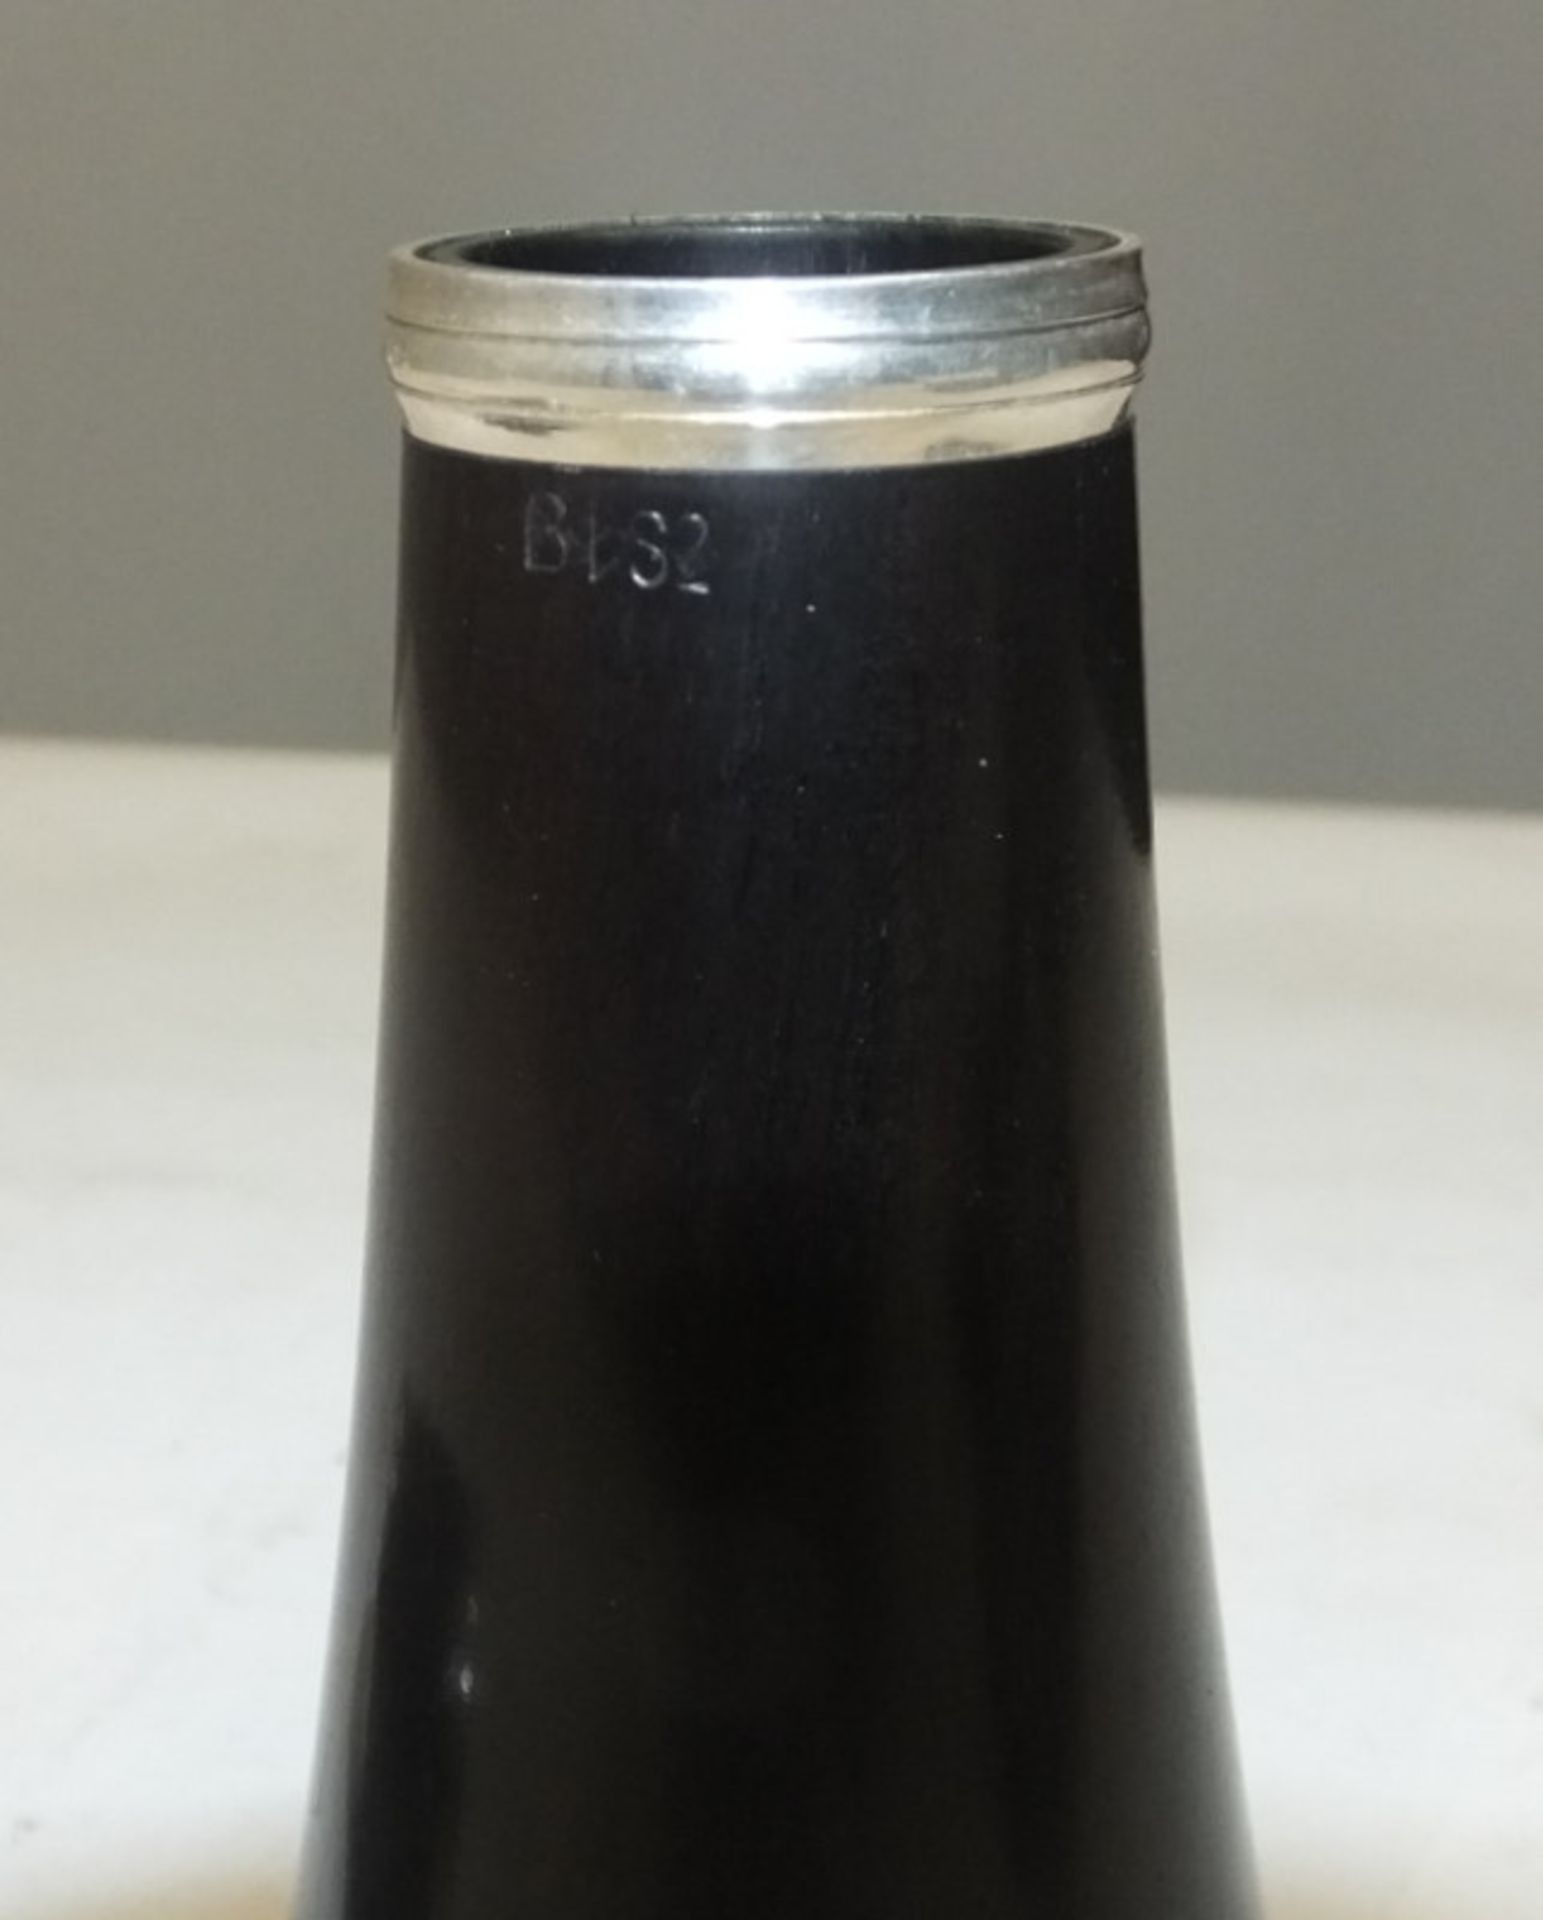 Howarth S2 Clarinet in case - Serial Number - 2228. - Image 12 of 17